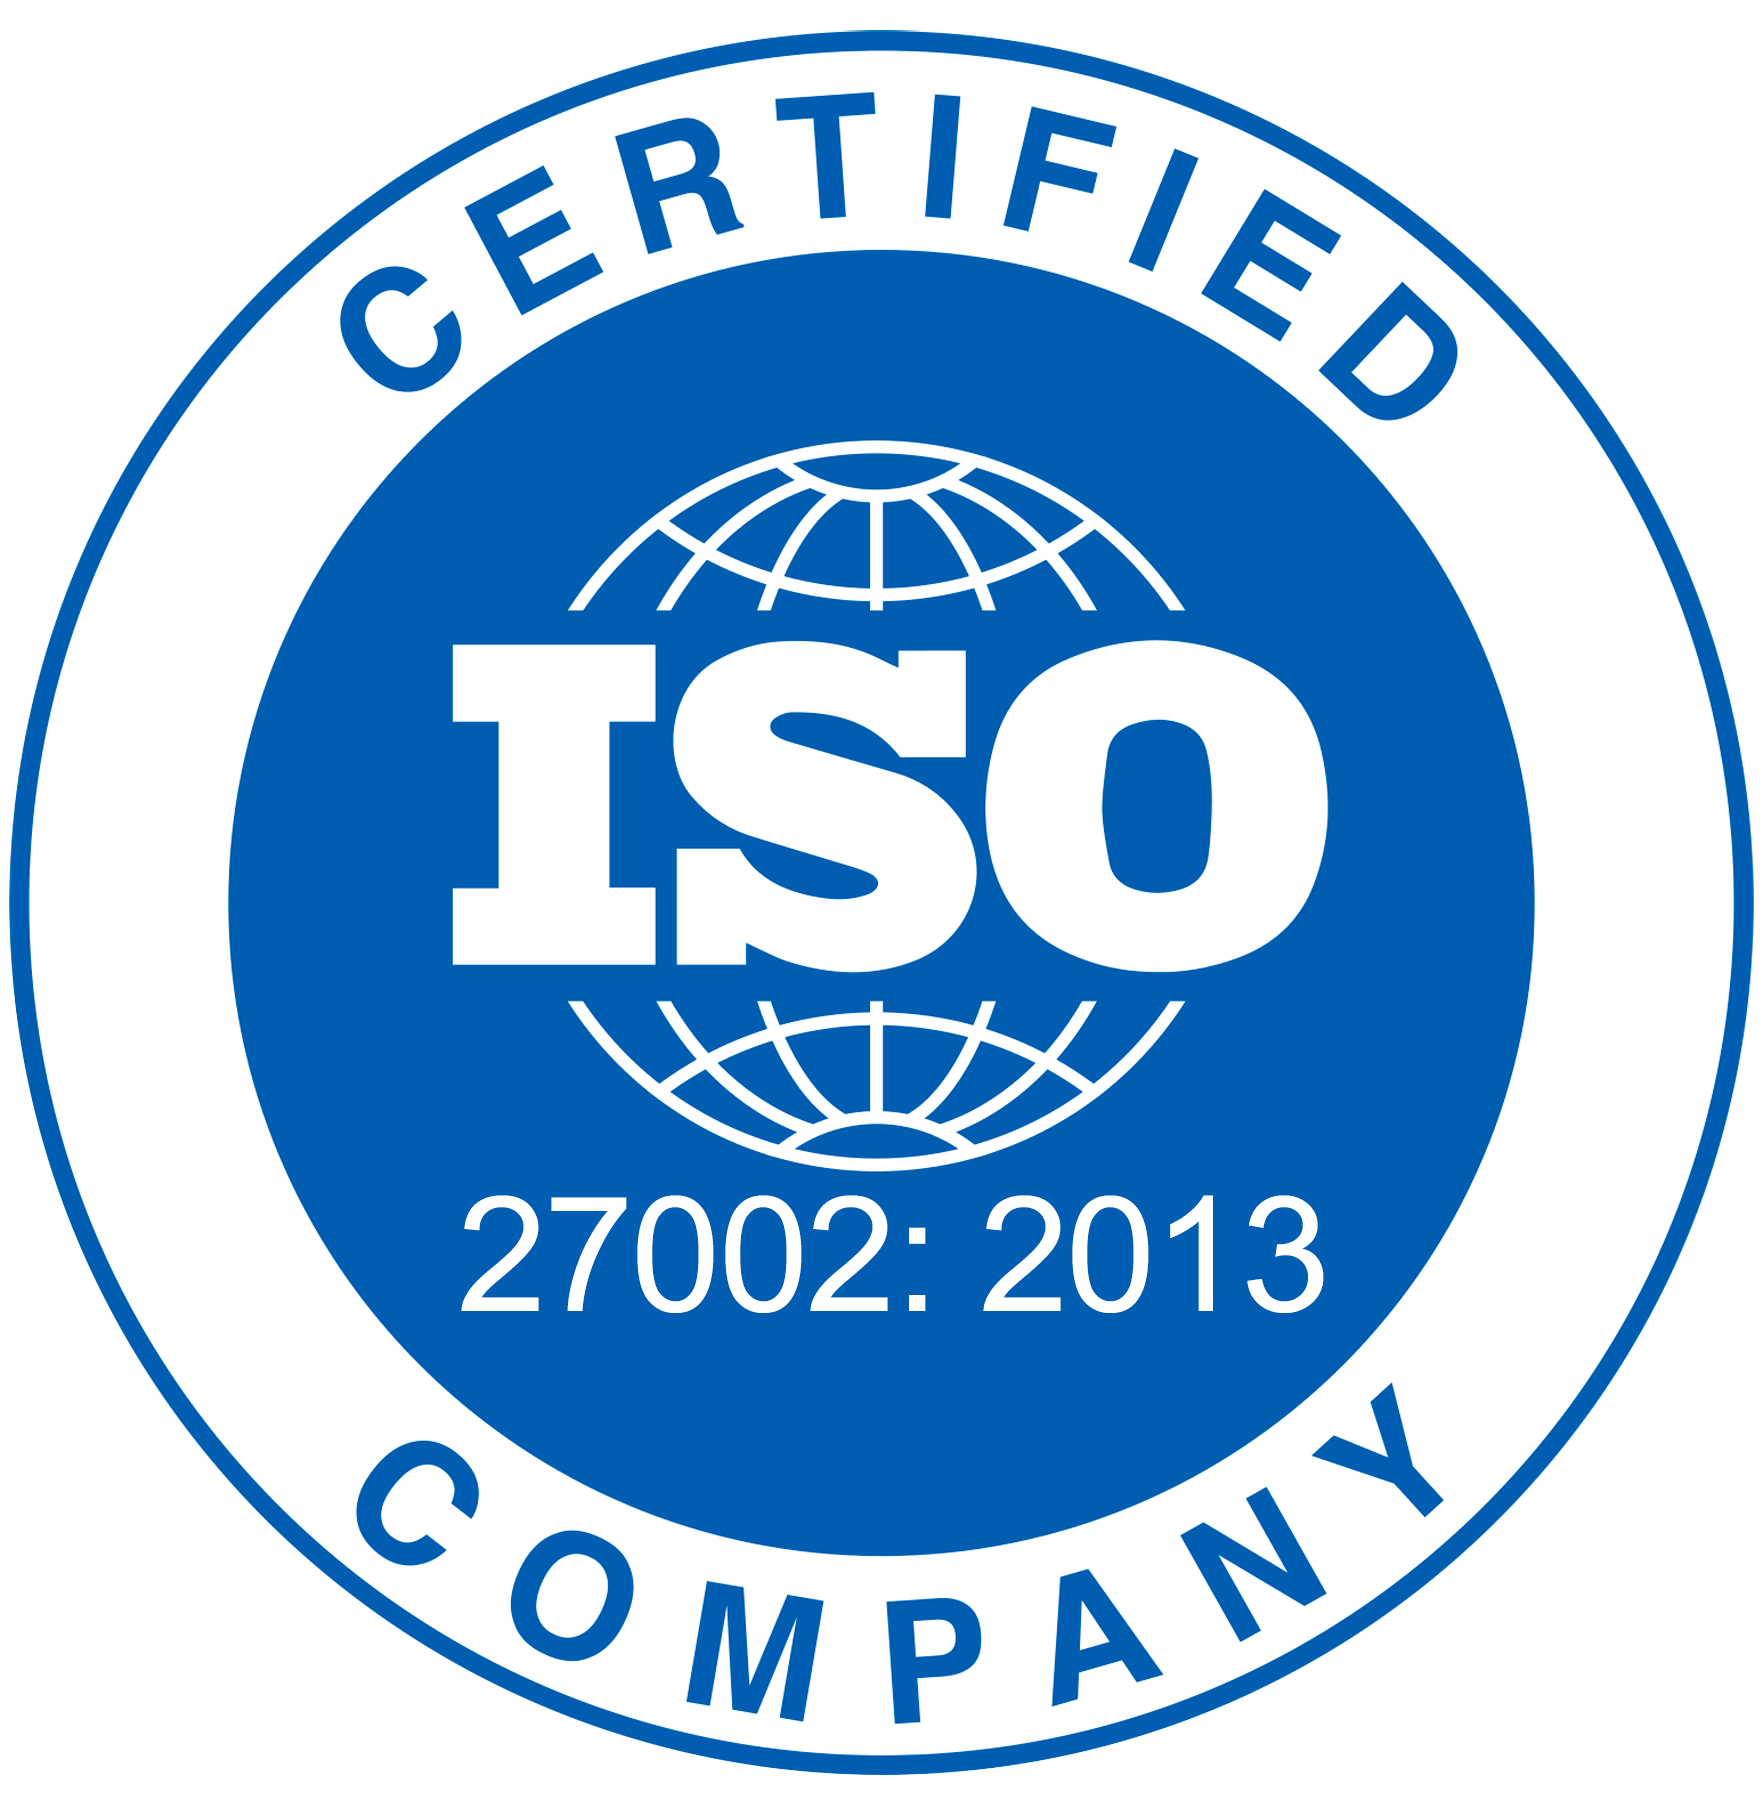 Certified ISO 27002 company